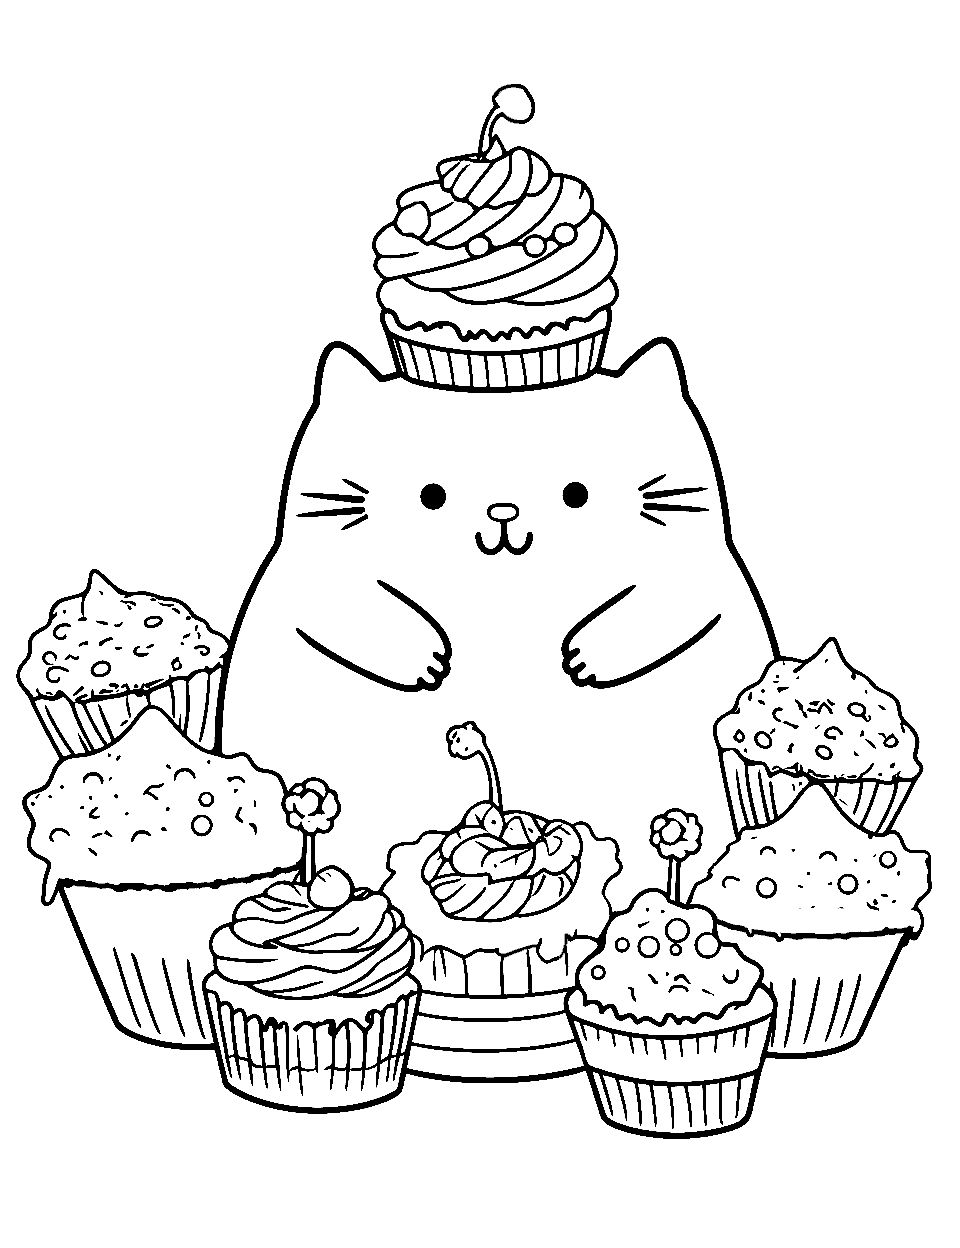 Dessert Paradise Coloring Page - Pusheen surrounded by cupcakes.